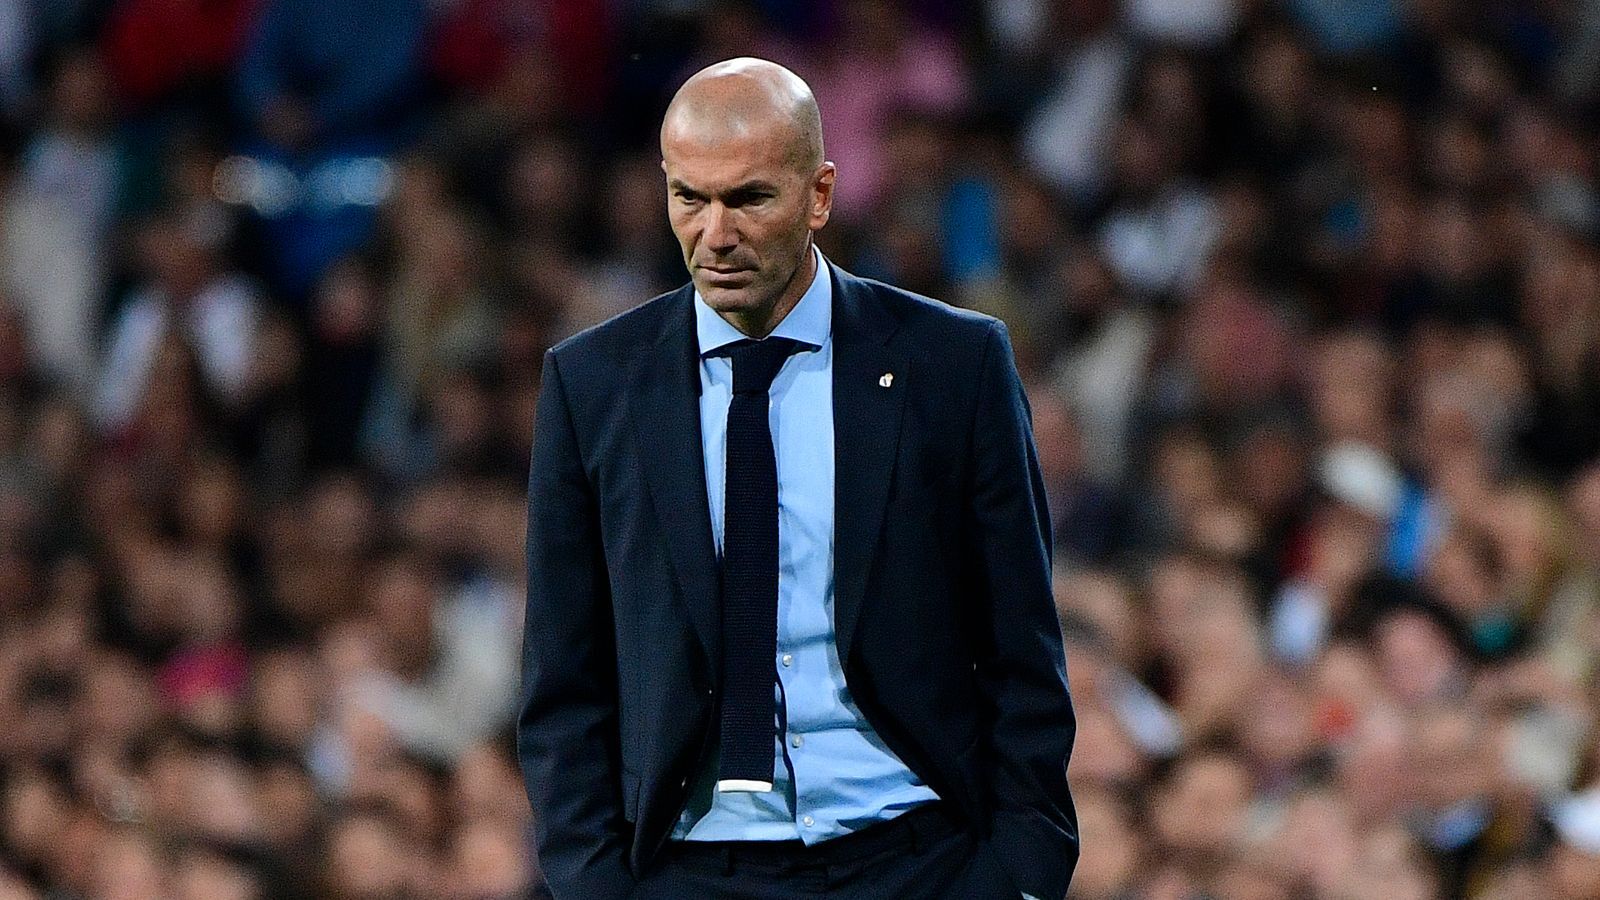 Real Madrid’s Clash with Éibar Marks 200 Games for Zidane as Their Coach